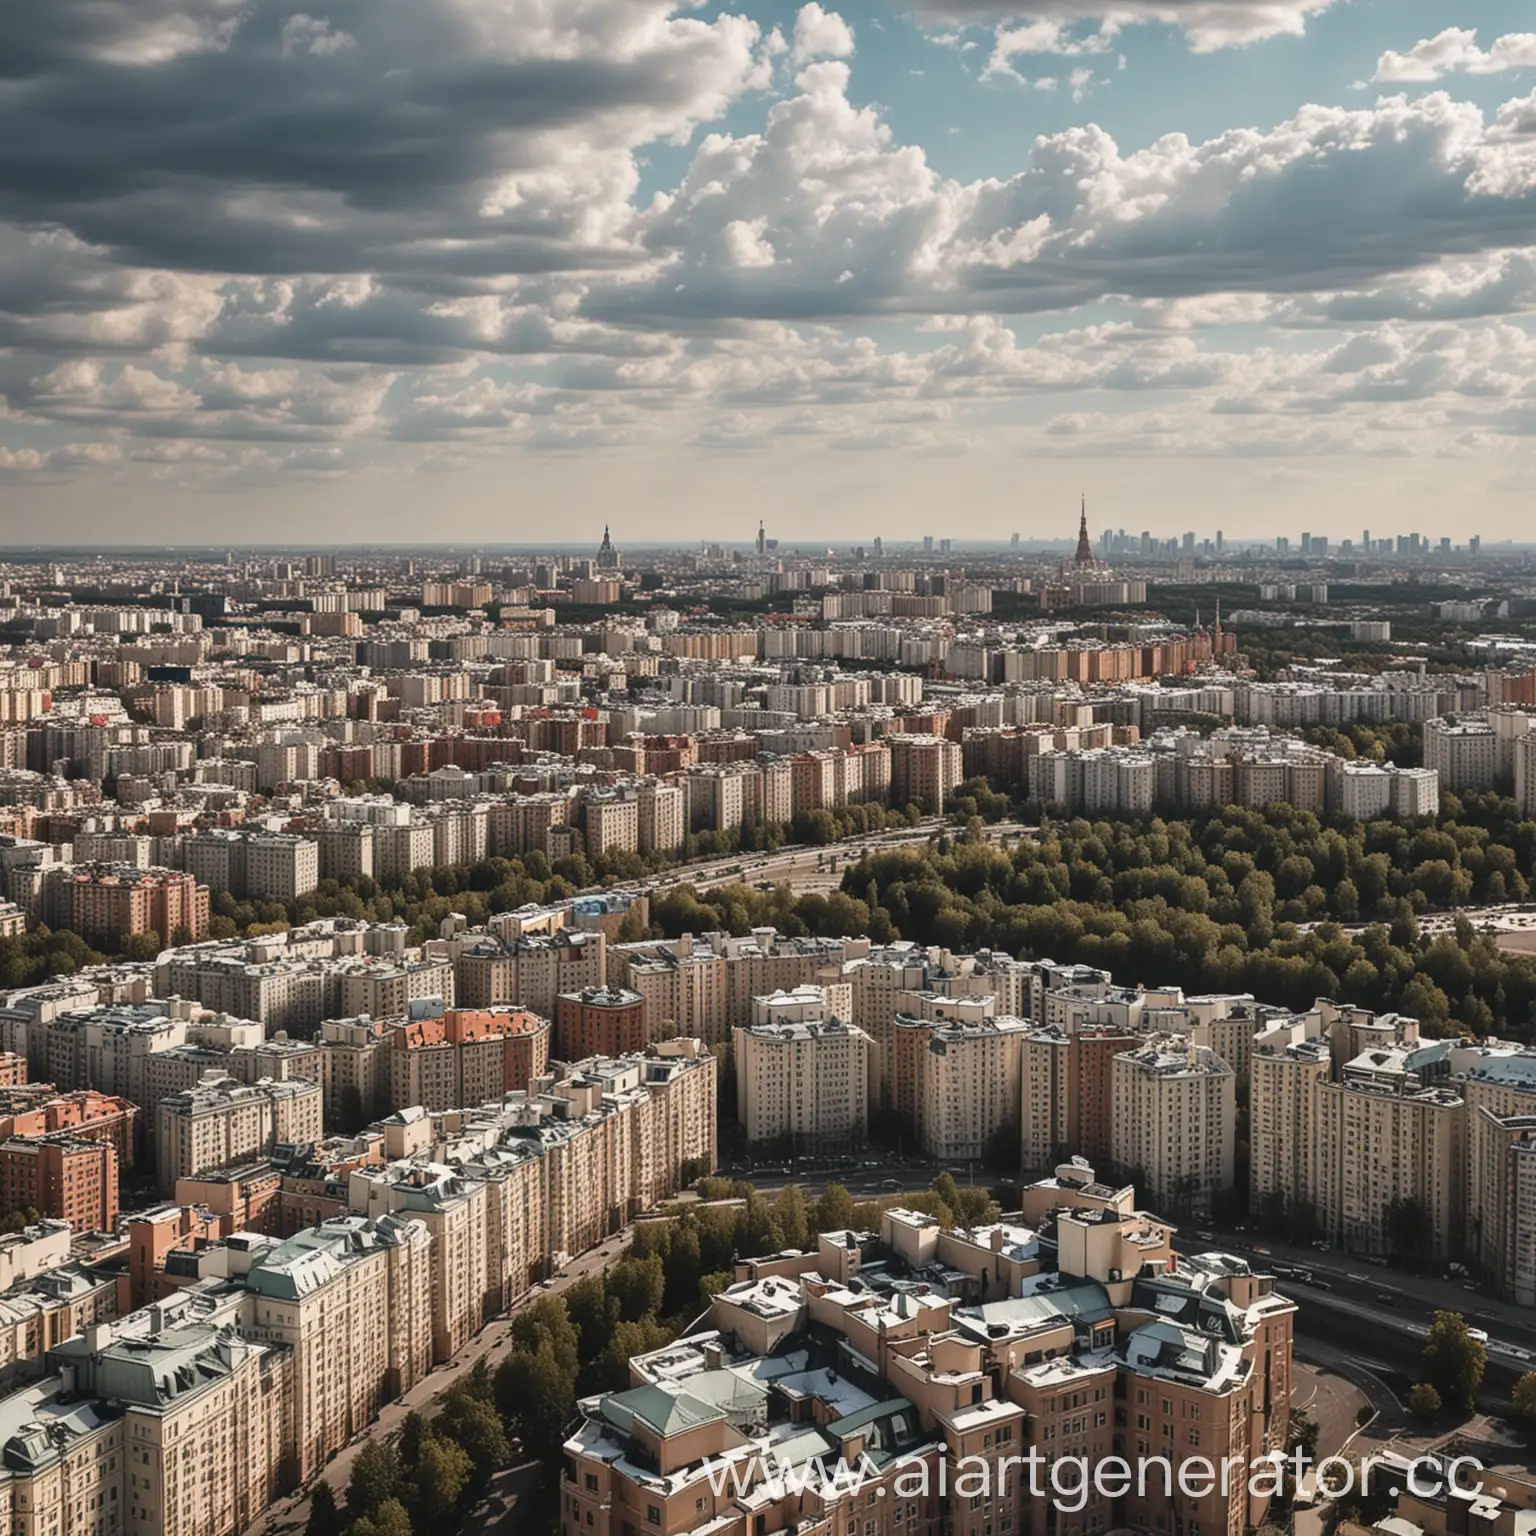 Panoramic-View-of-Moscow-Cityscape-from-the-20th-Floor